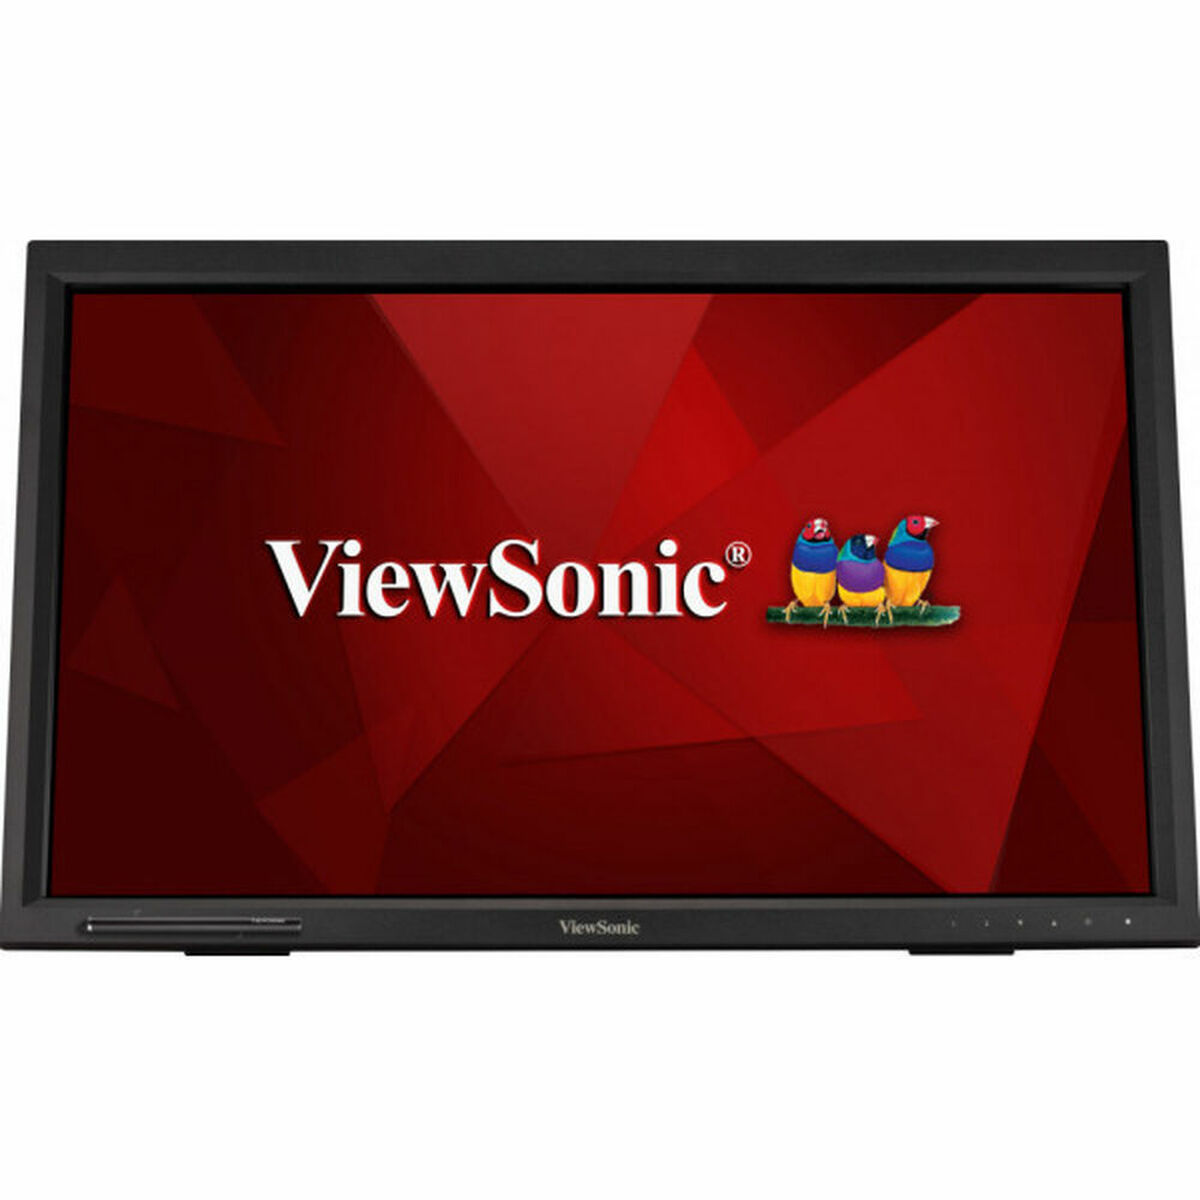 Monitor con Touch Screen ViewSonic TD2423 FHD IPS LED 24" VA